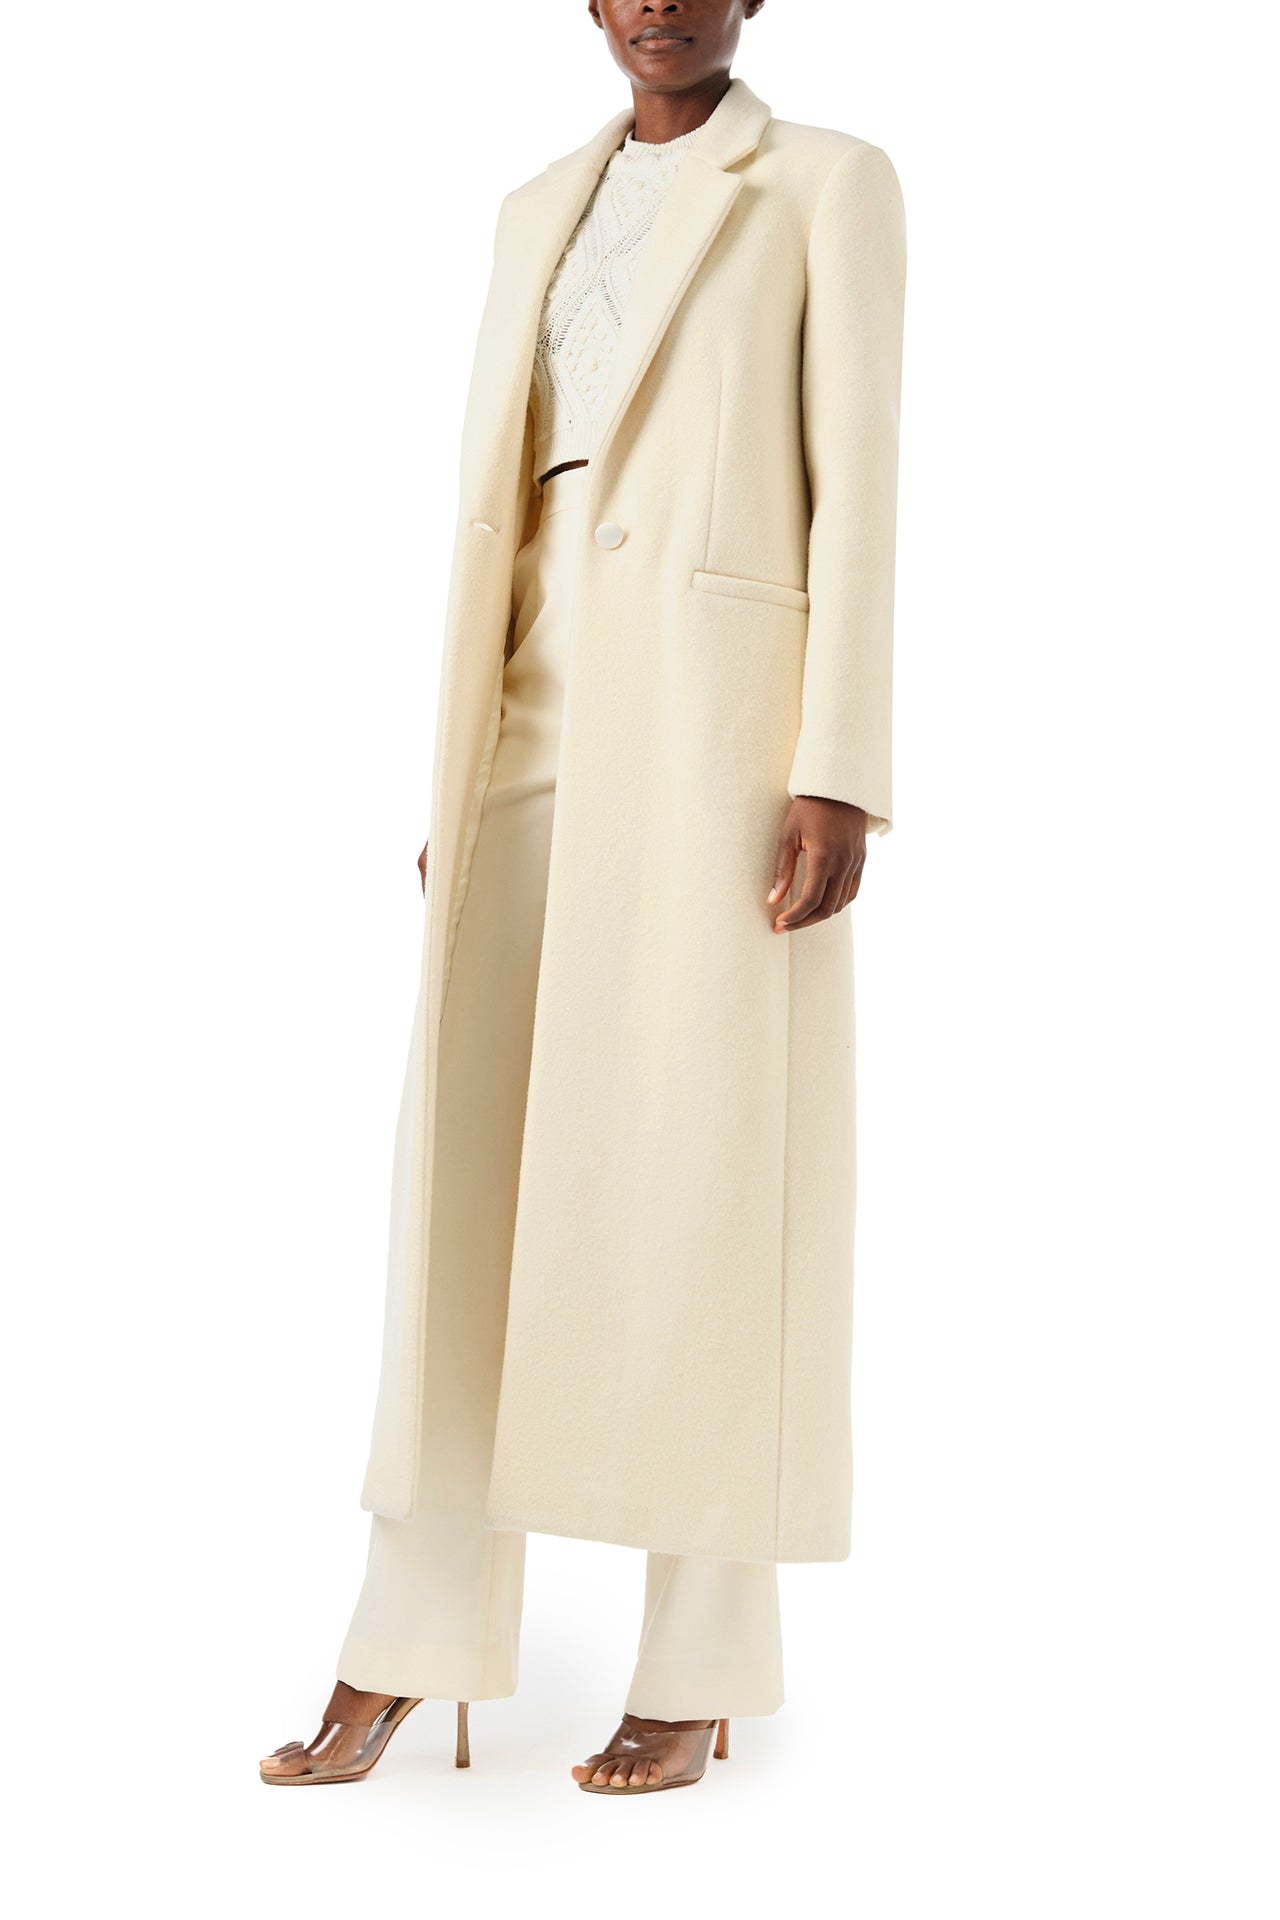 Monique Lhuillier Fall 2024 long sleeve coat in creme colored wool and single closure button - left side.